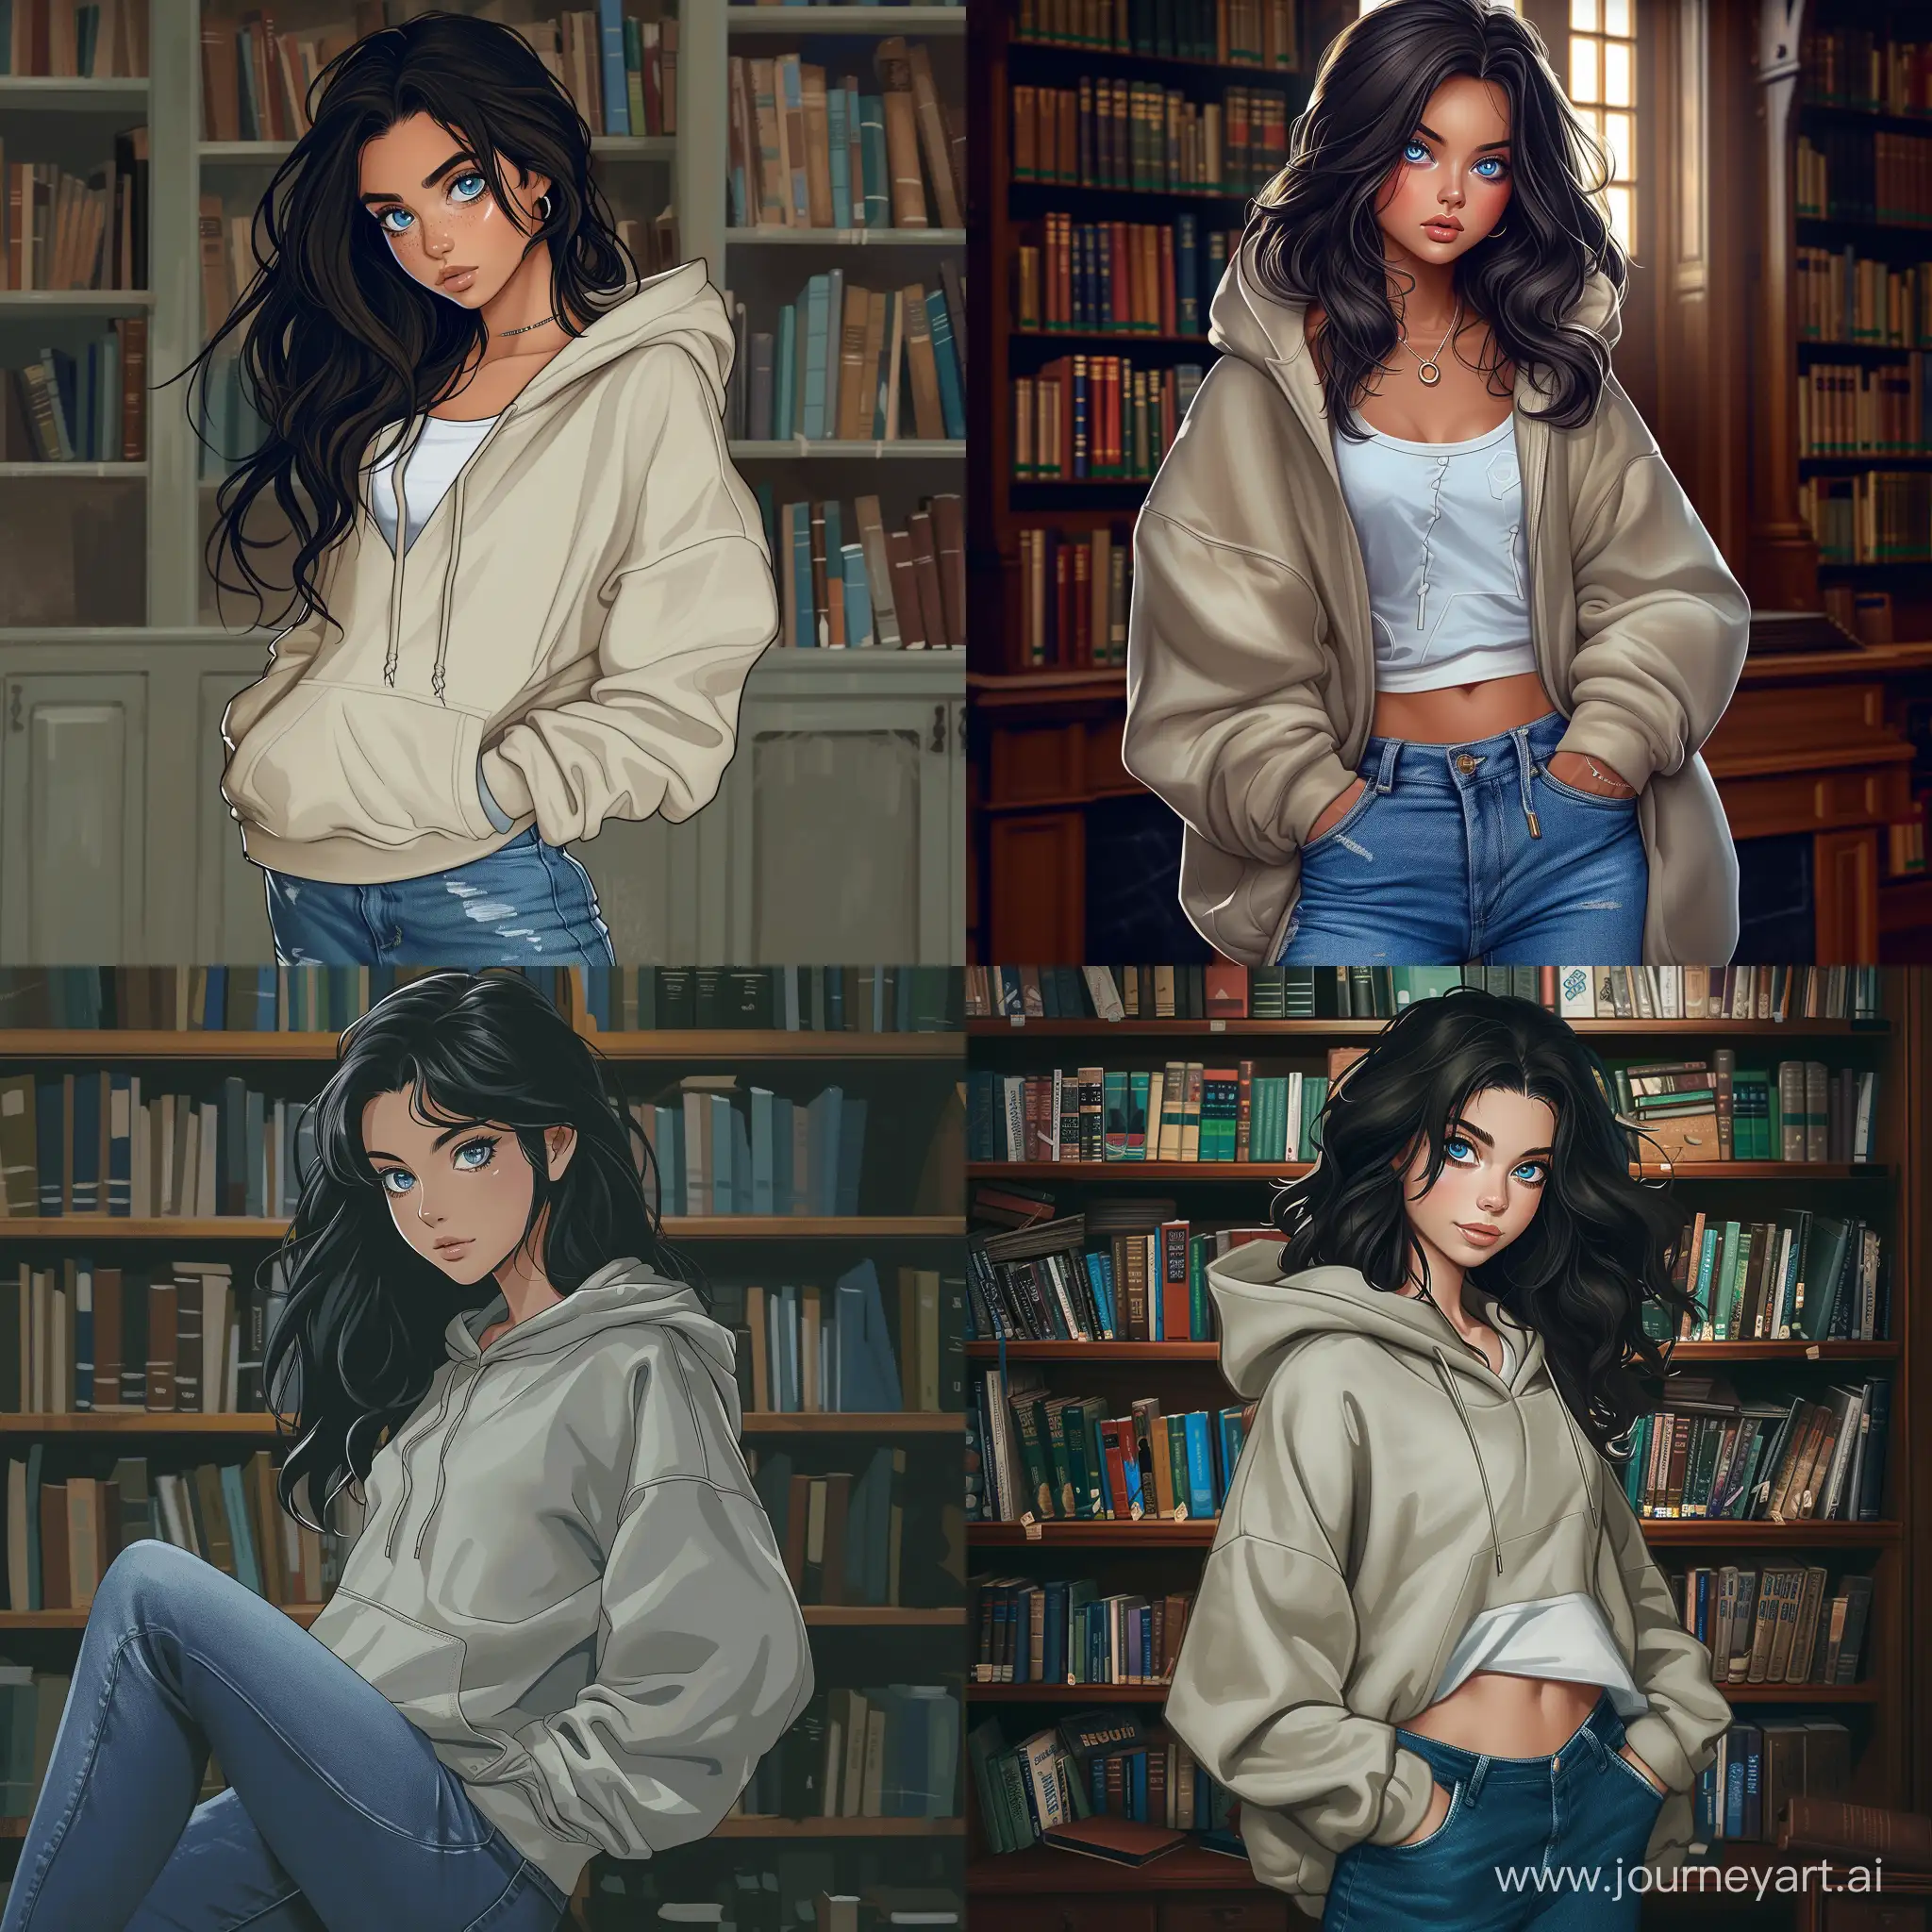 Stylish-Teenage-Girl-in-Oversize-Hoodie-at-Library-HighQuality-Cartoon-Art